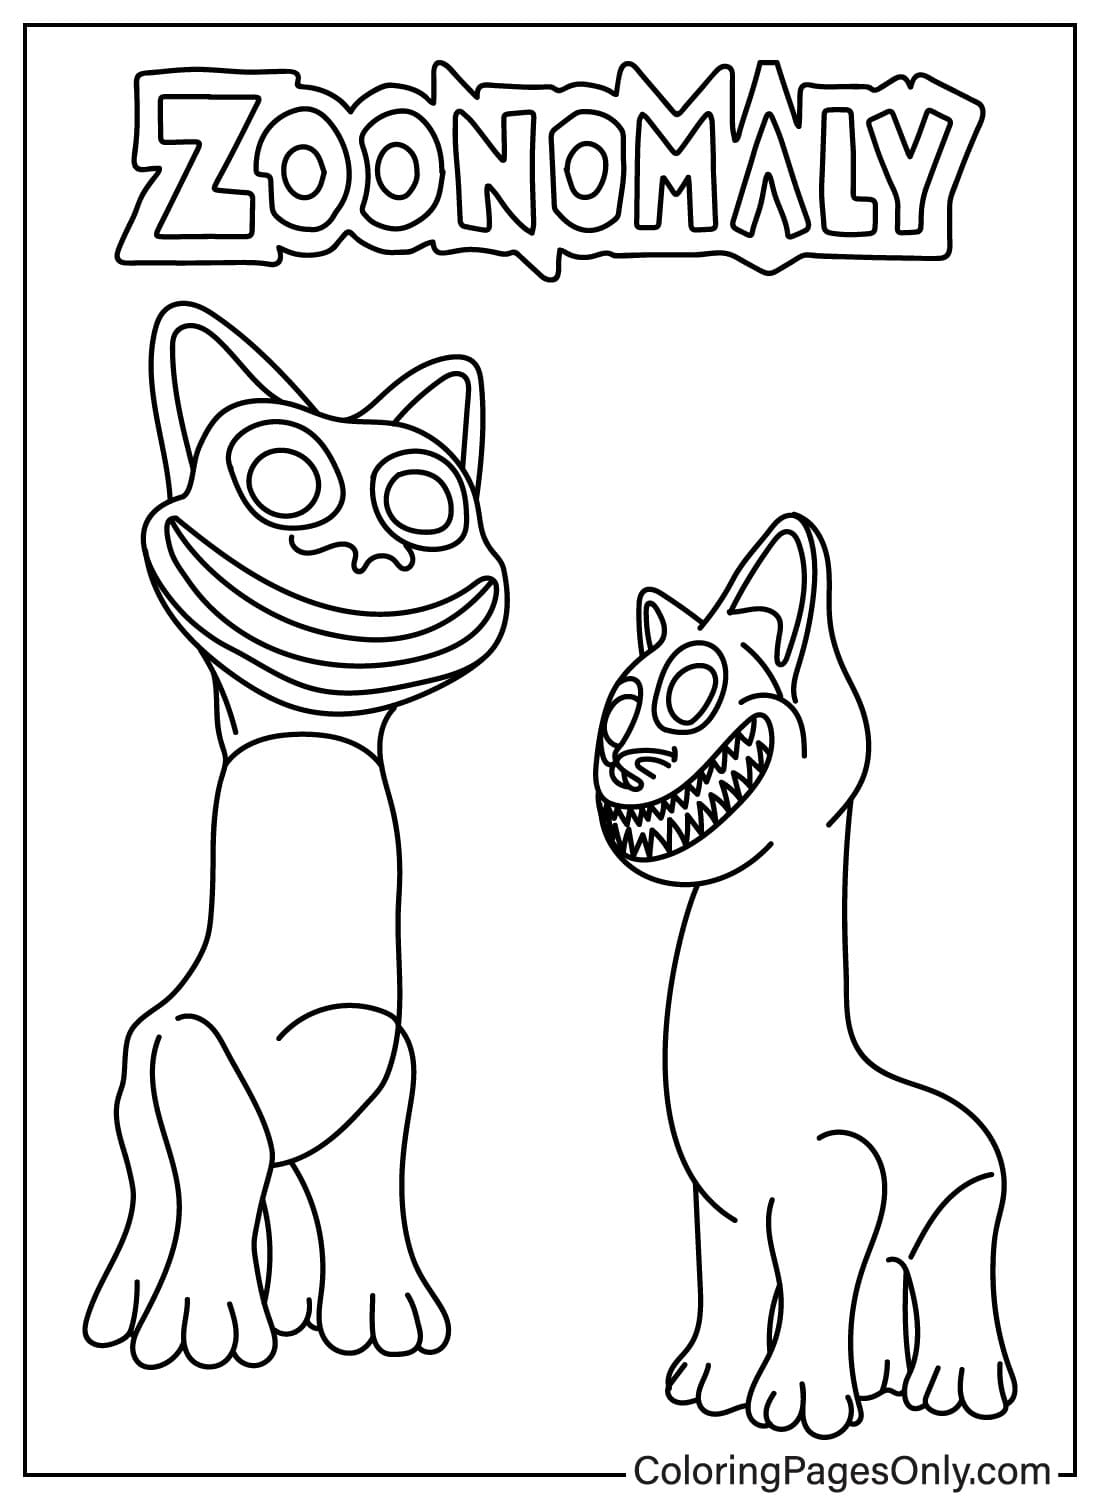 Zoonomaly Monster Smile Cat Coloring Page from Zoonomaly